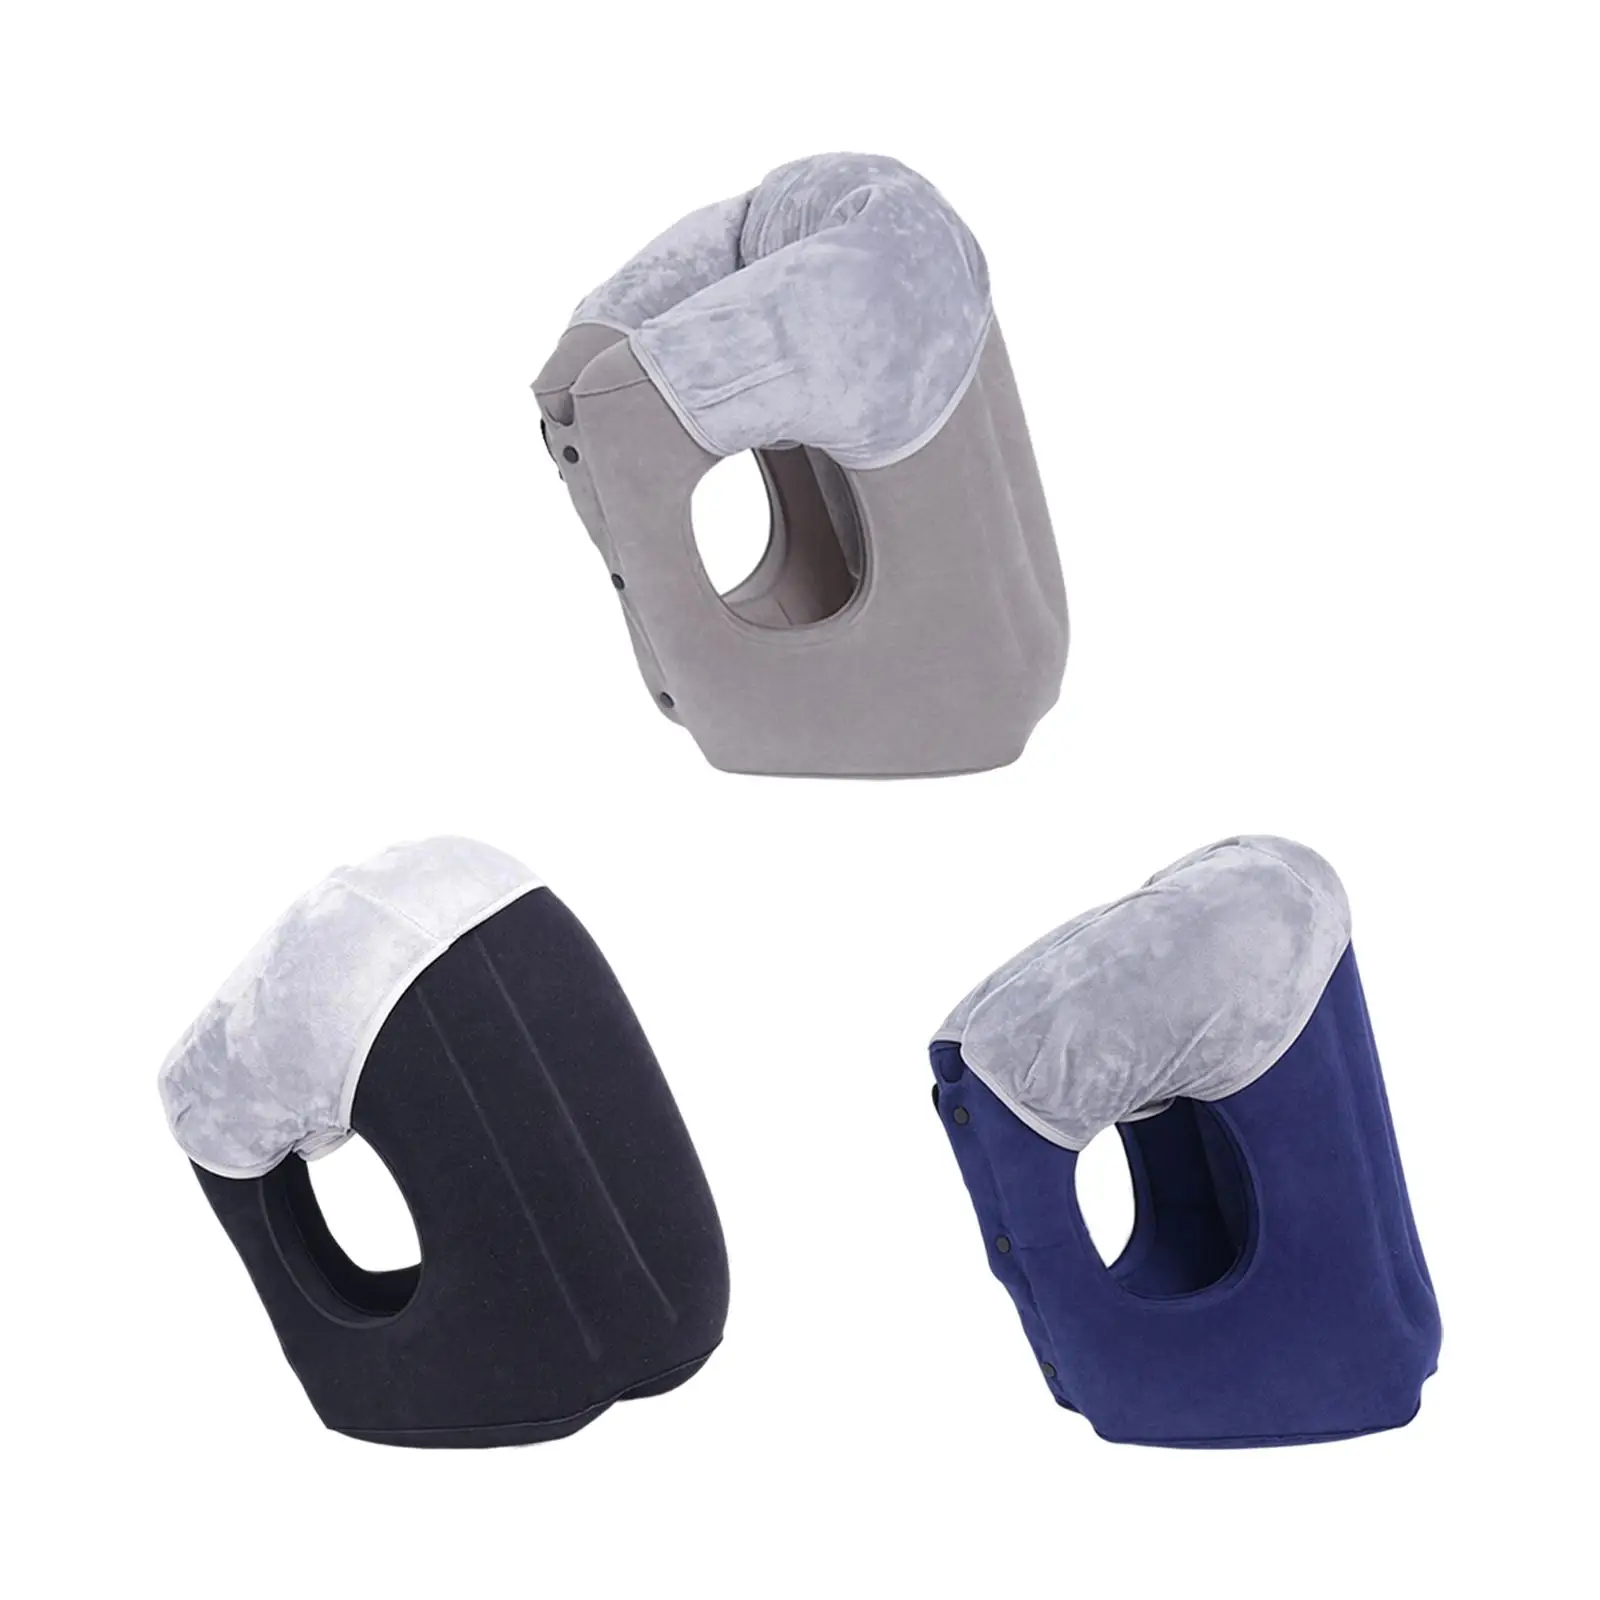 Folding Inflatable Air Pillow with Drawstring Bag for Bus Office